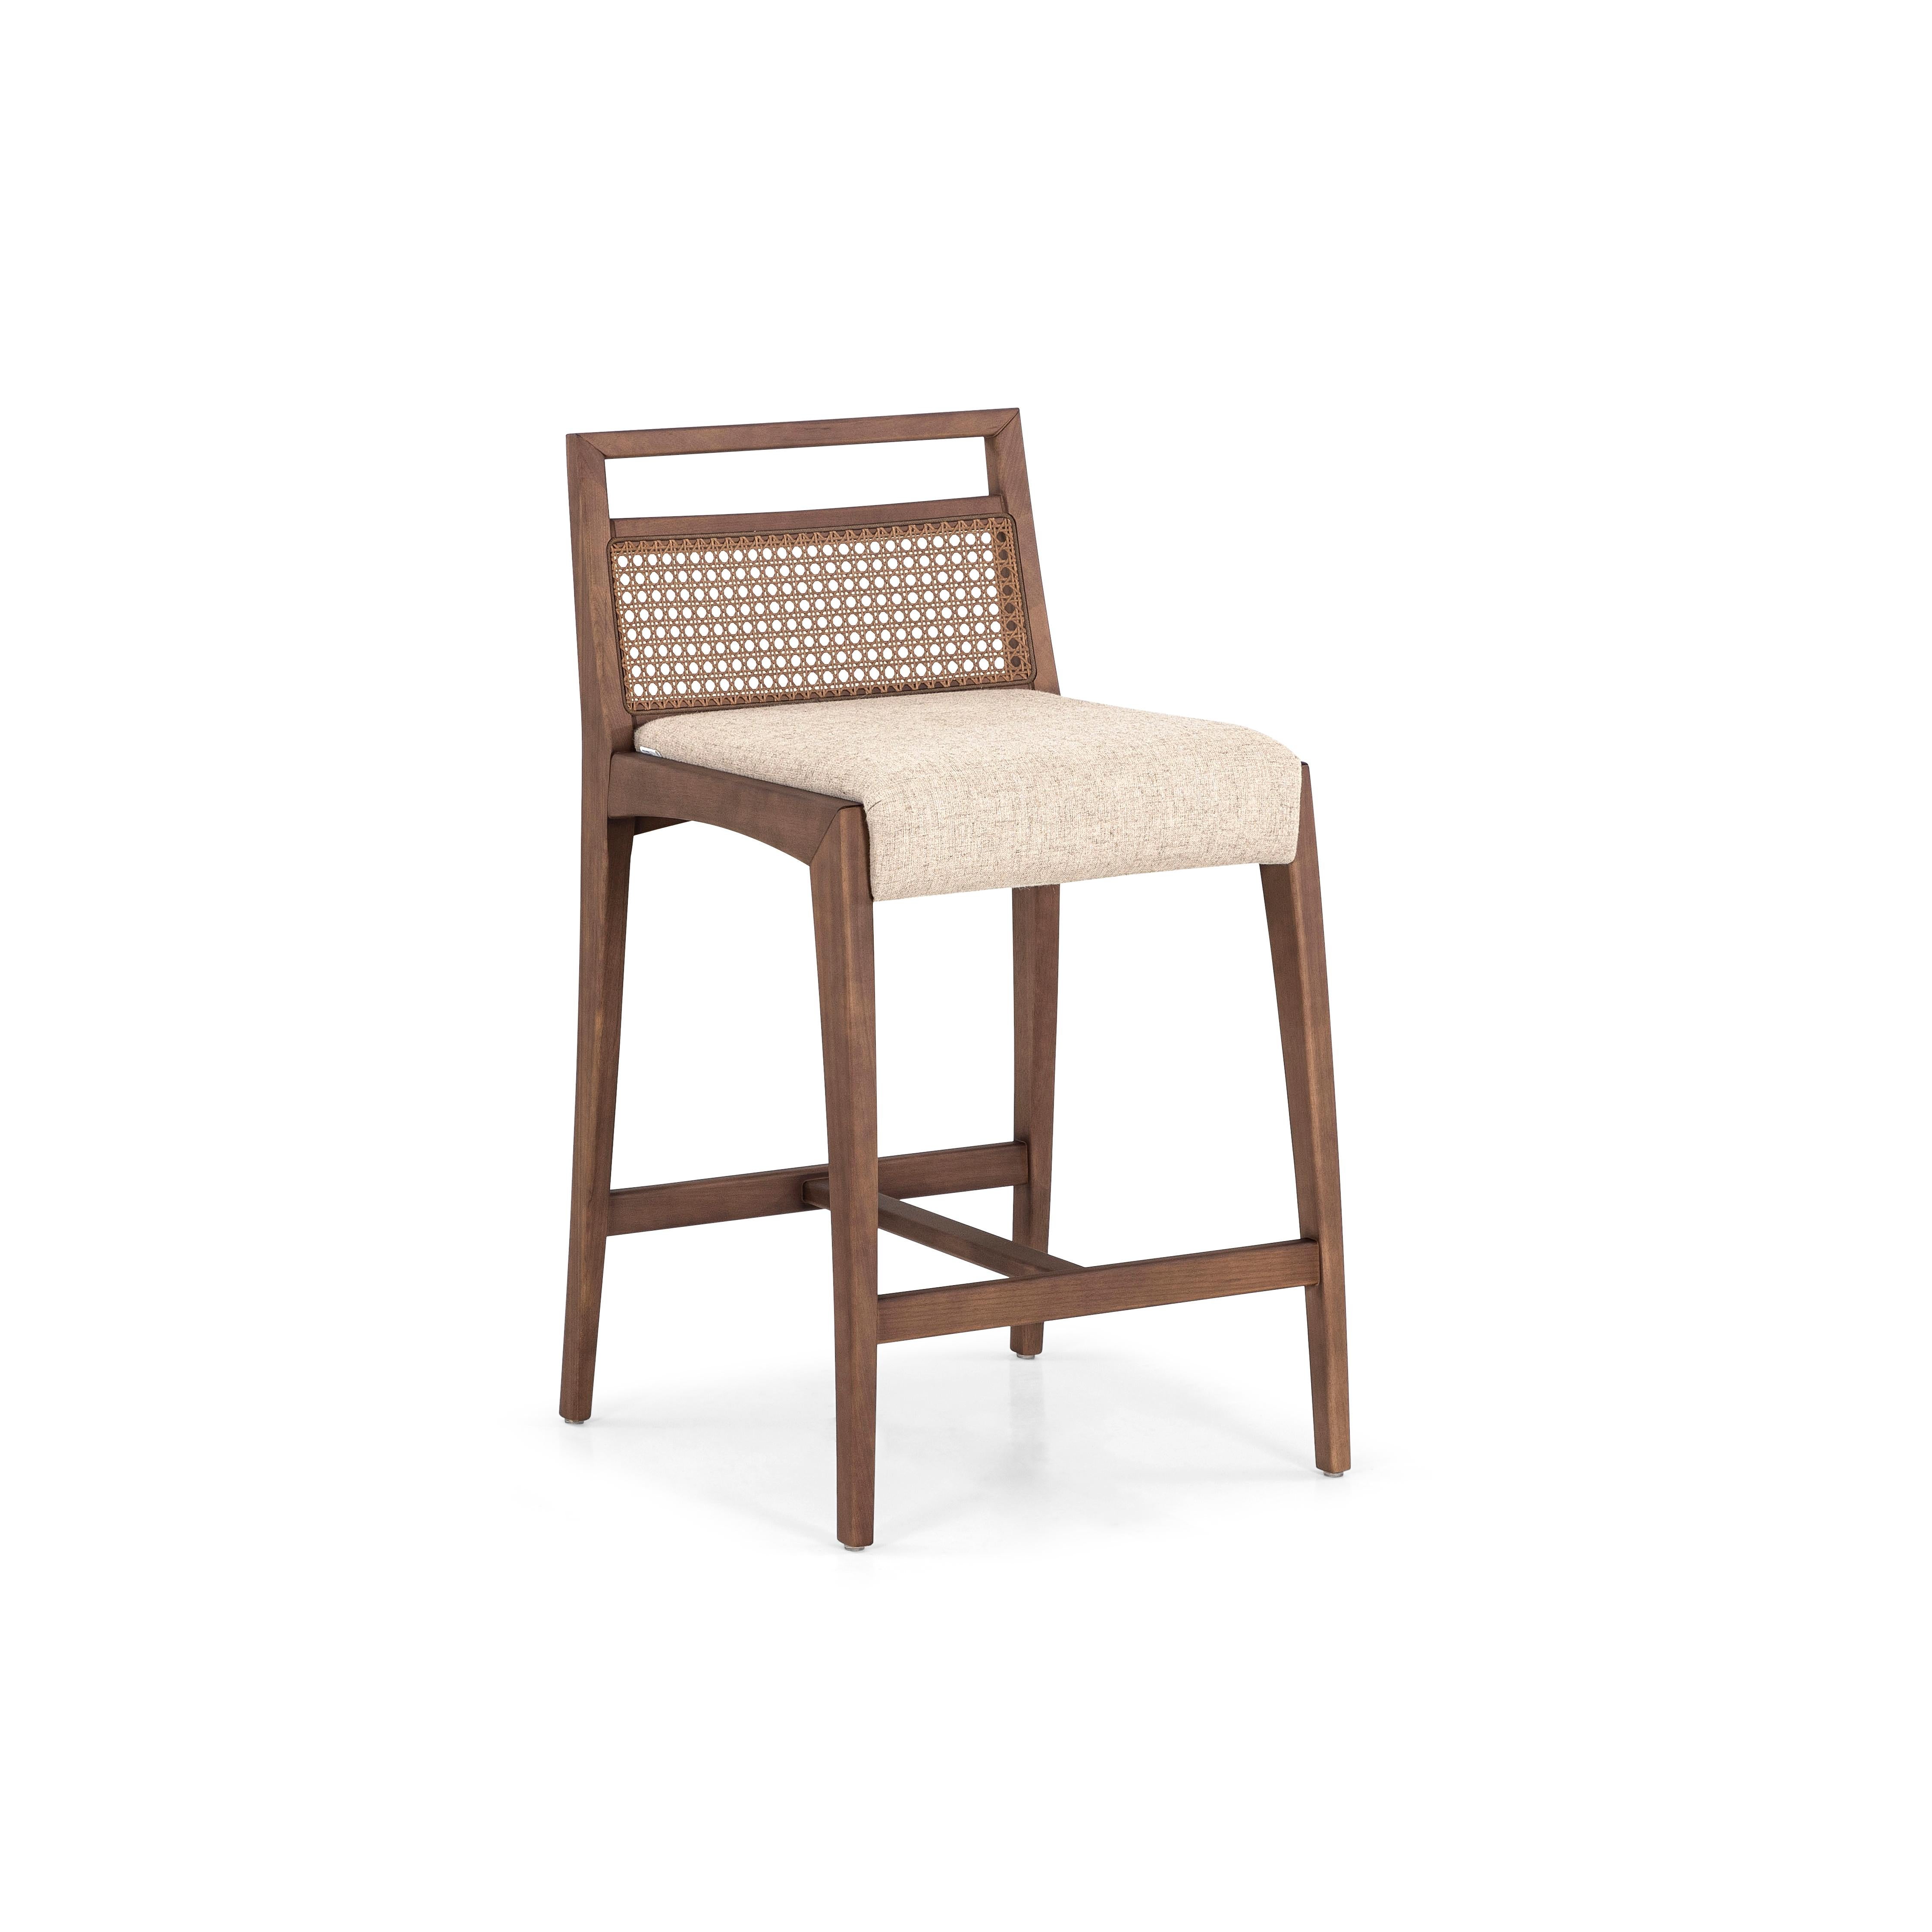 The Sotto counter stool is a piece that is designed with a taller high to use at a countertop or a high table. This chair has striking features, where resistance and delicacy meet. Designed with a walnut finish wood legs and frame, a beige fabric